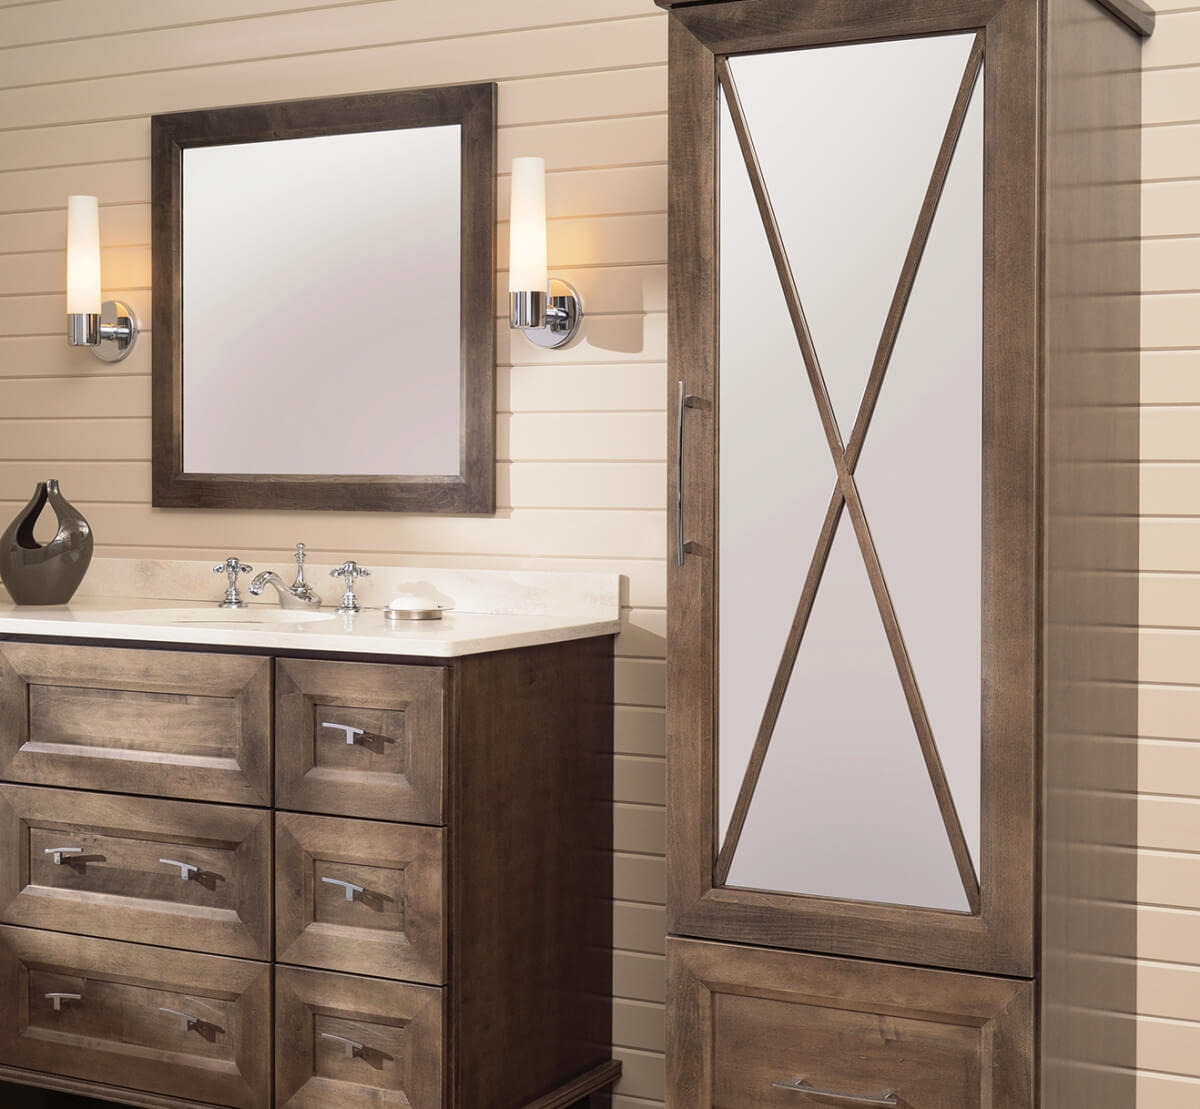 Light to Medium stained bathroom vanity and linen cabinet with an X pattern mullion door with a tall mirror glass insert in the cabinet door.